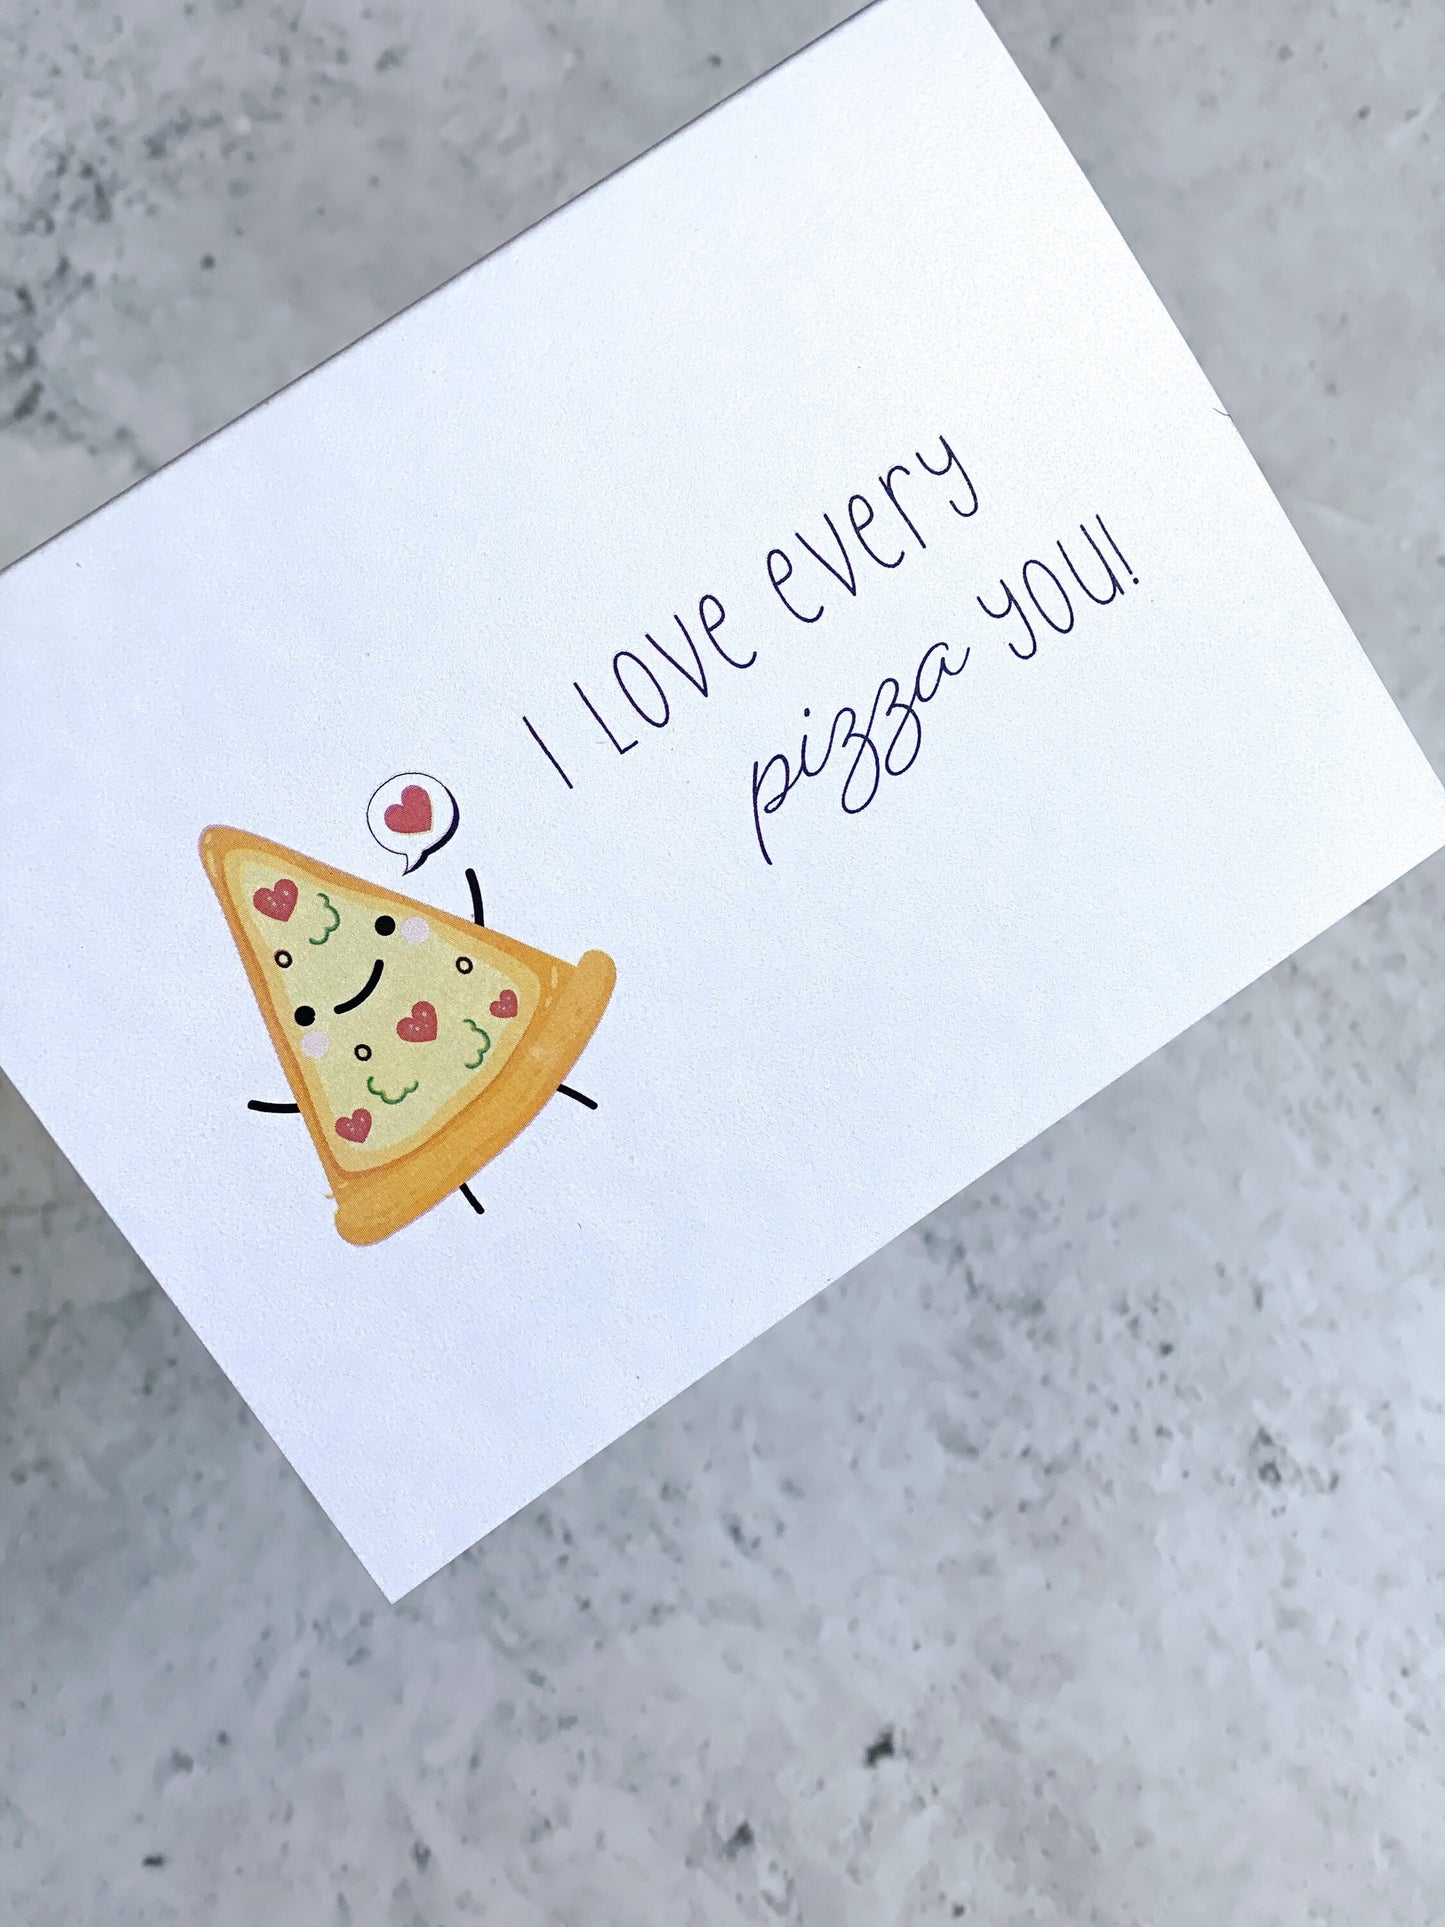 Love every pizza you Card